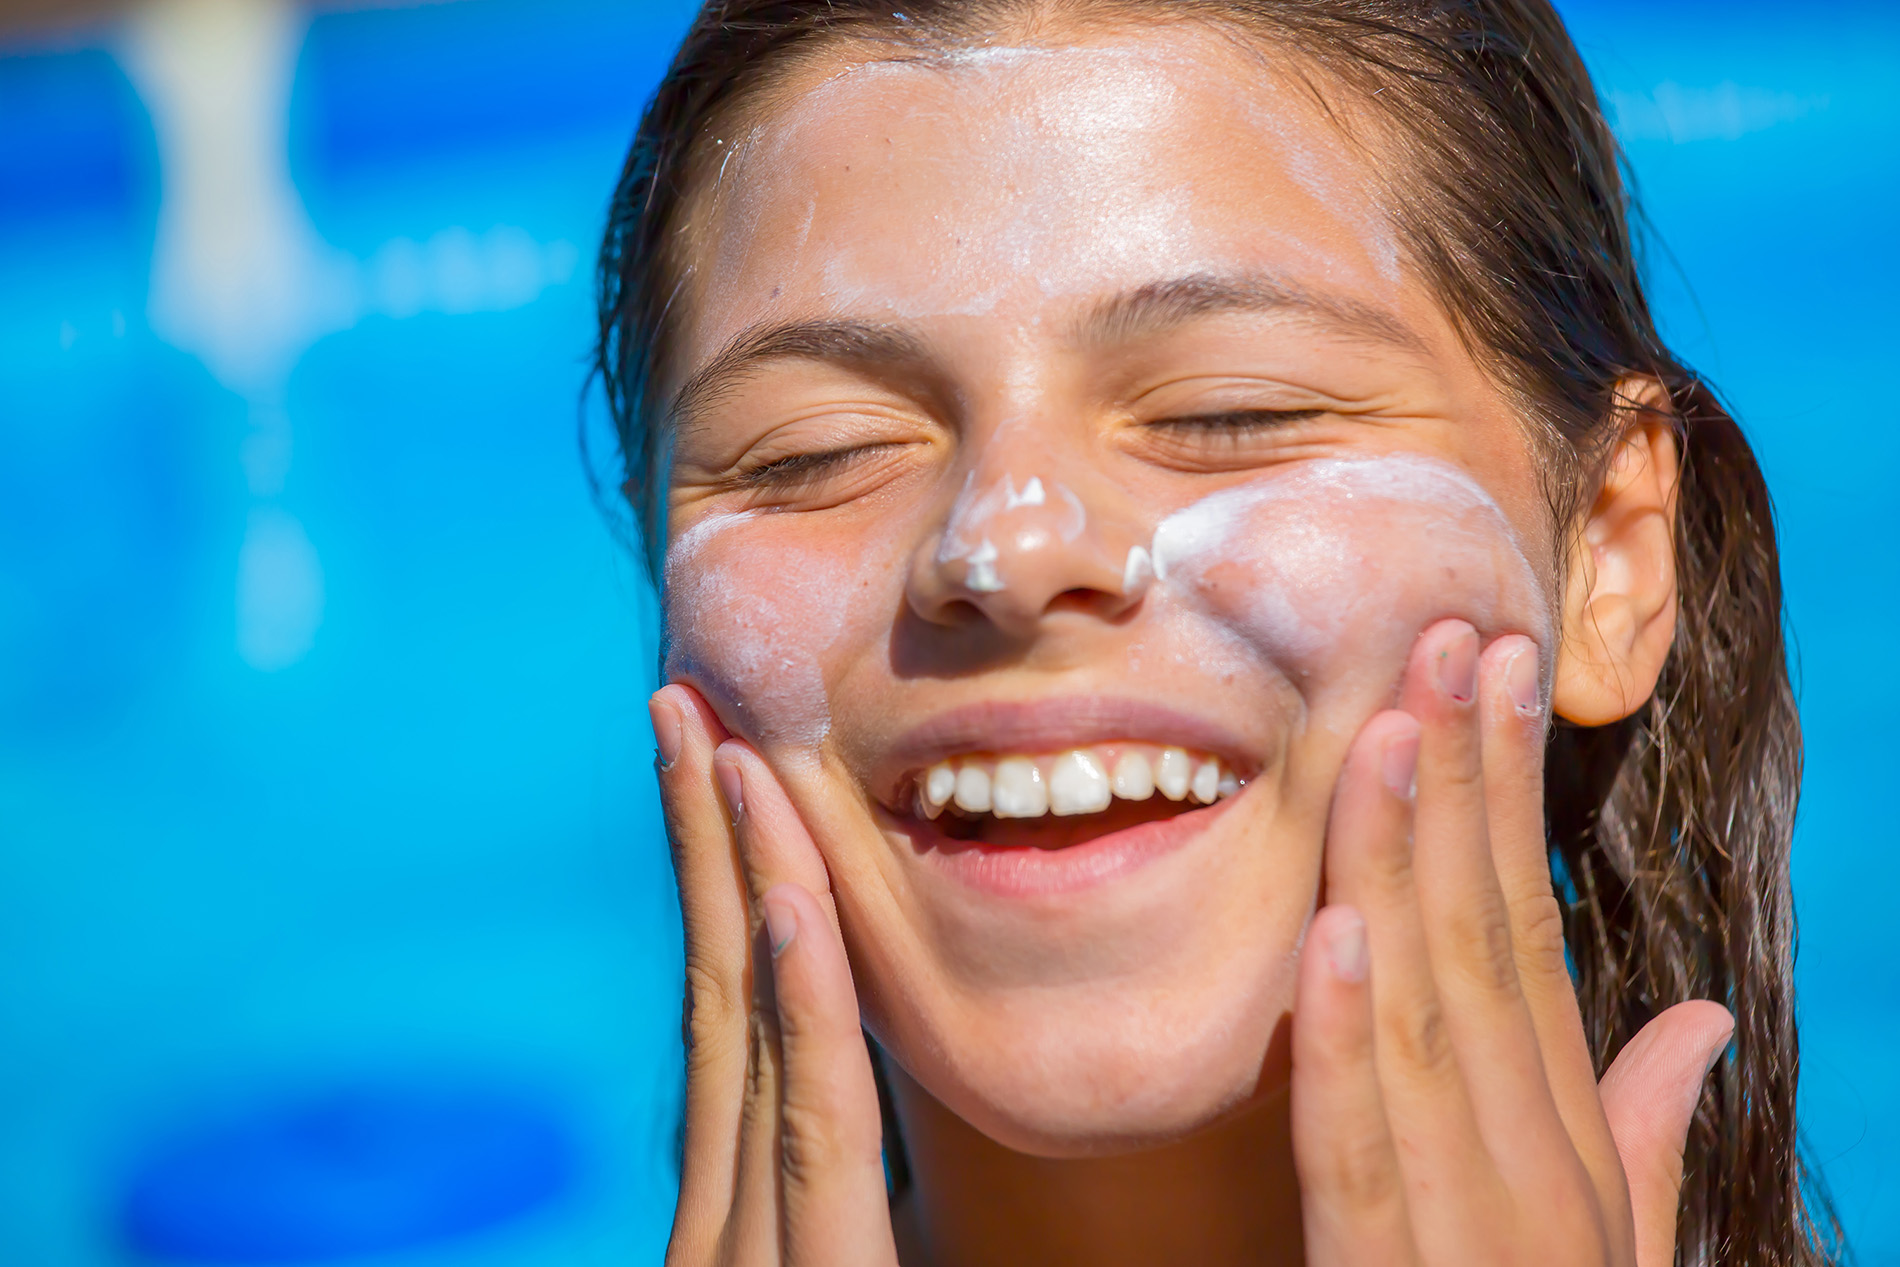 young girl applying sunscreen to face by pool